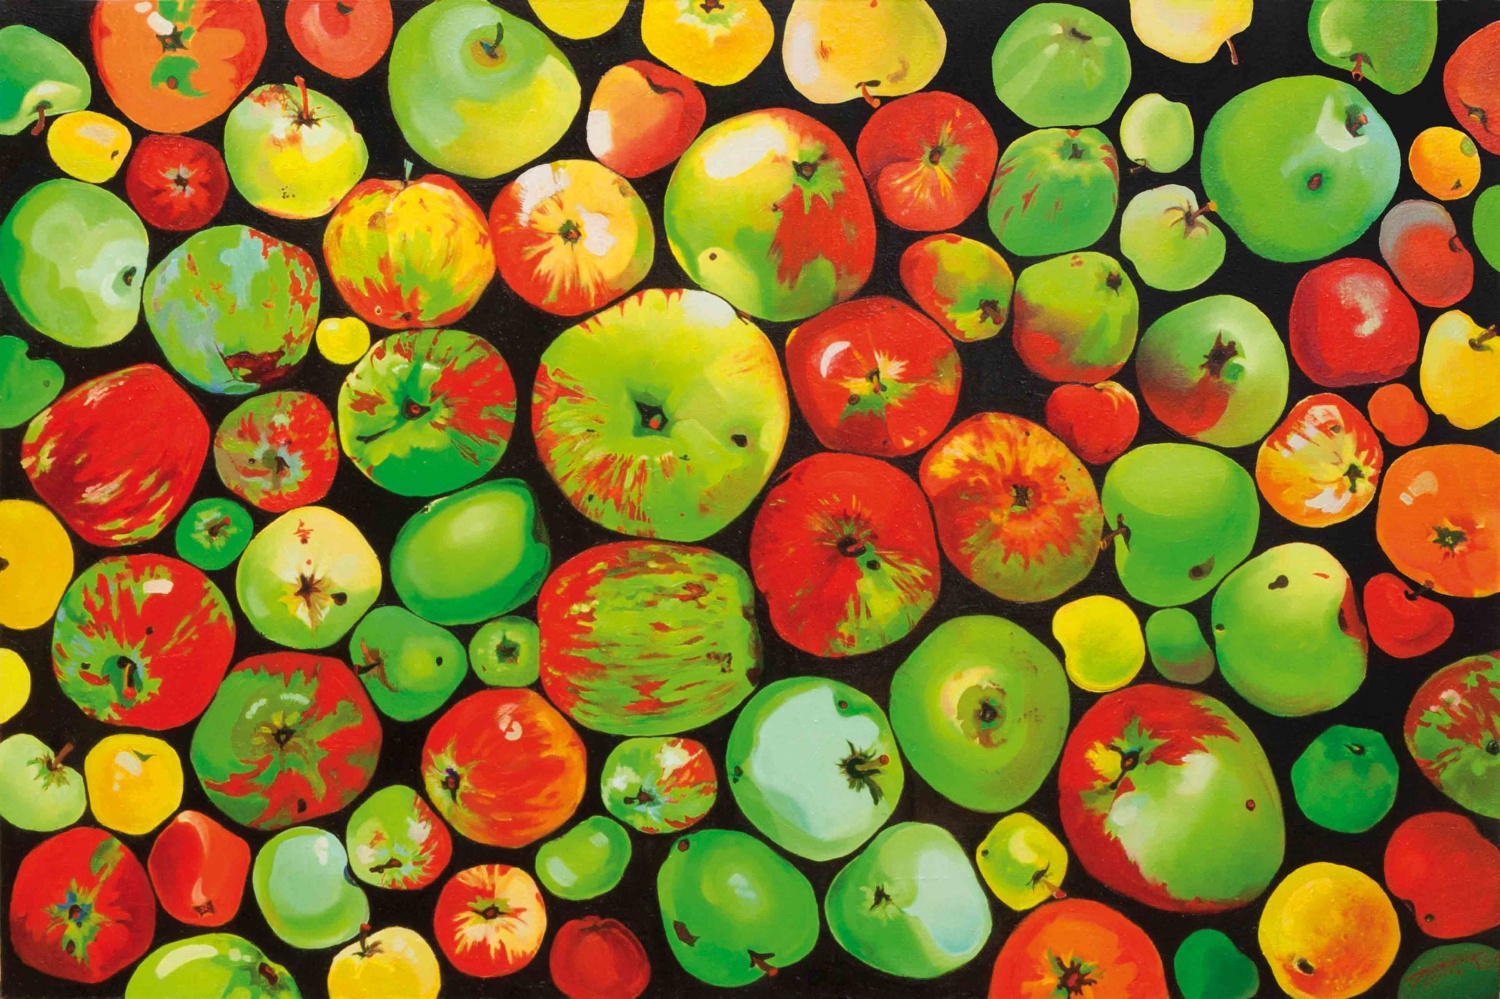 "Through the prism of apples", 2011